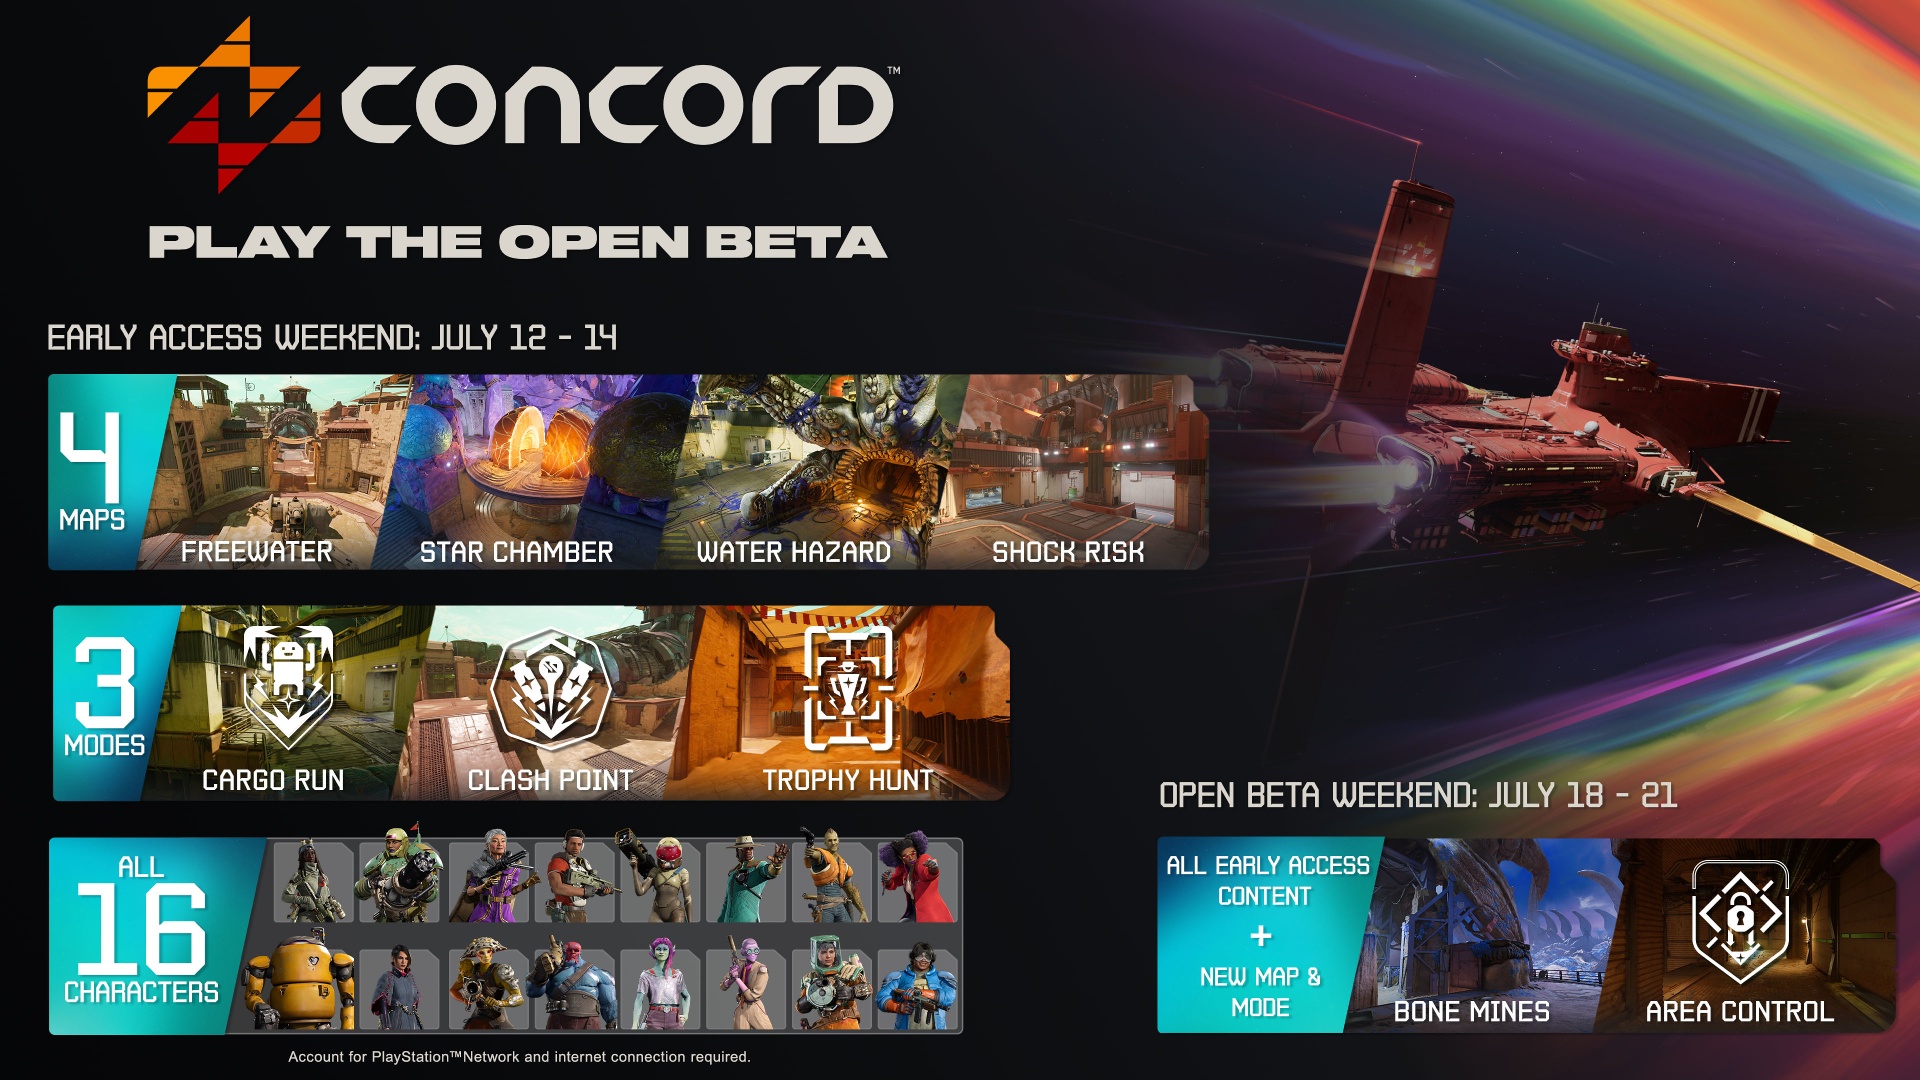 concord beta maps modes and characters